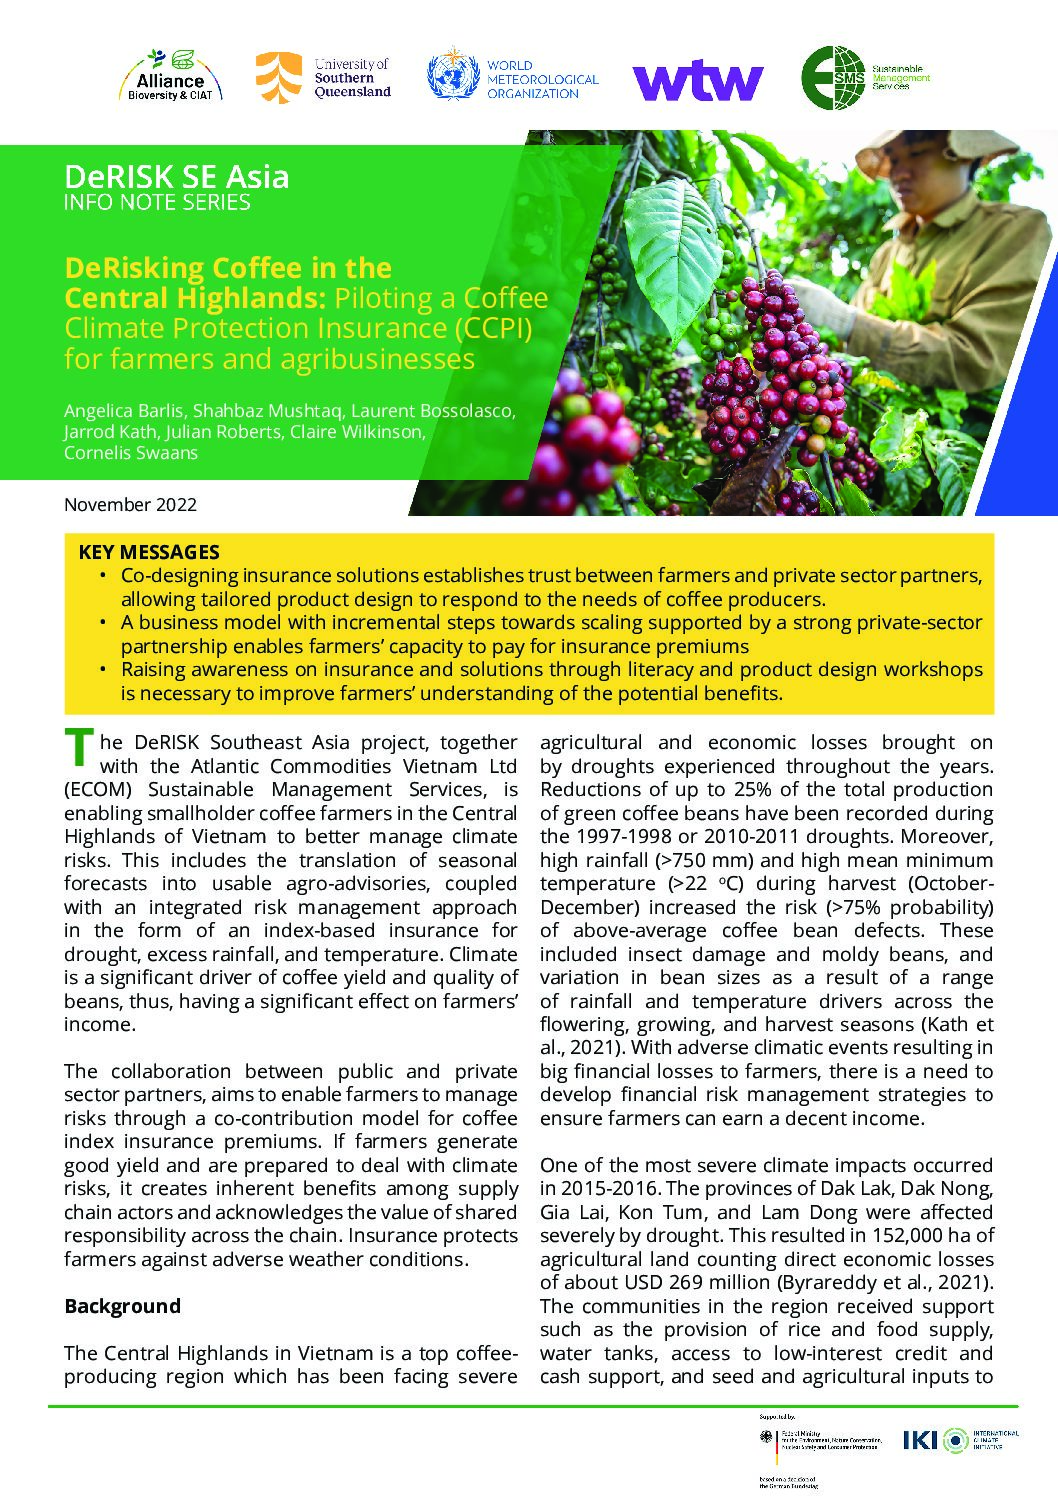 DeRisking coffee in the Central Highlands: Piloting a coffee climate protection insurance for farmers and agribusinesses